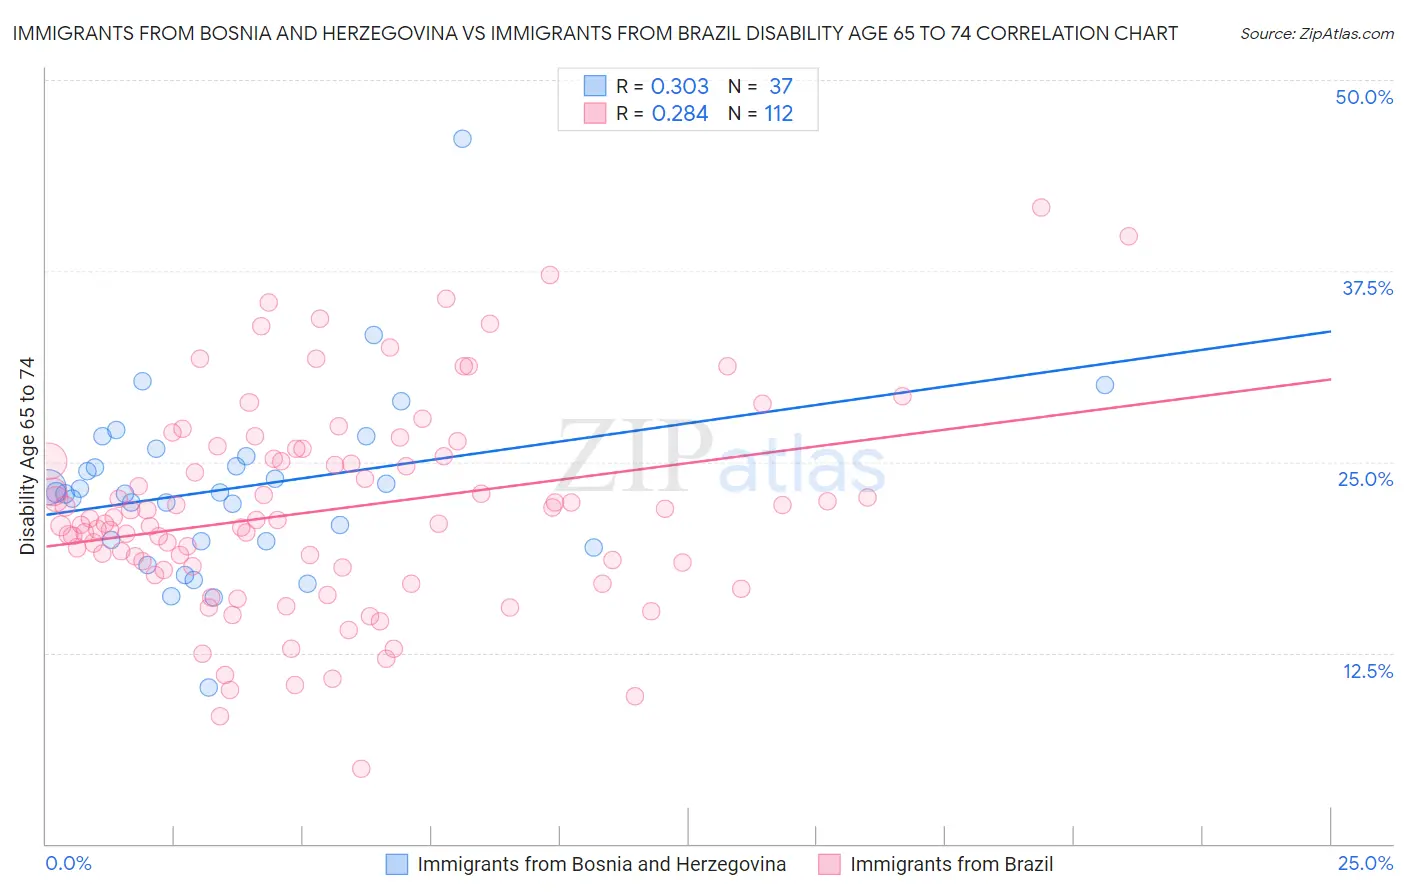 Immigrants from Bosnia and Herzegovina vs Immigrants from Brazil Disability Age 65 to 74